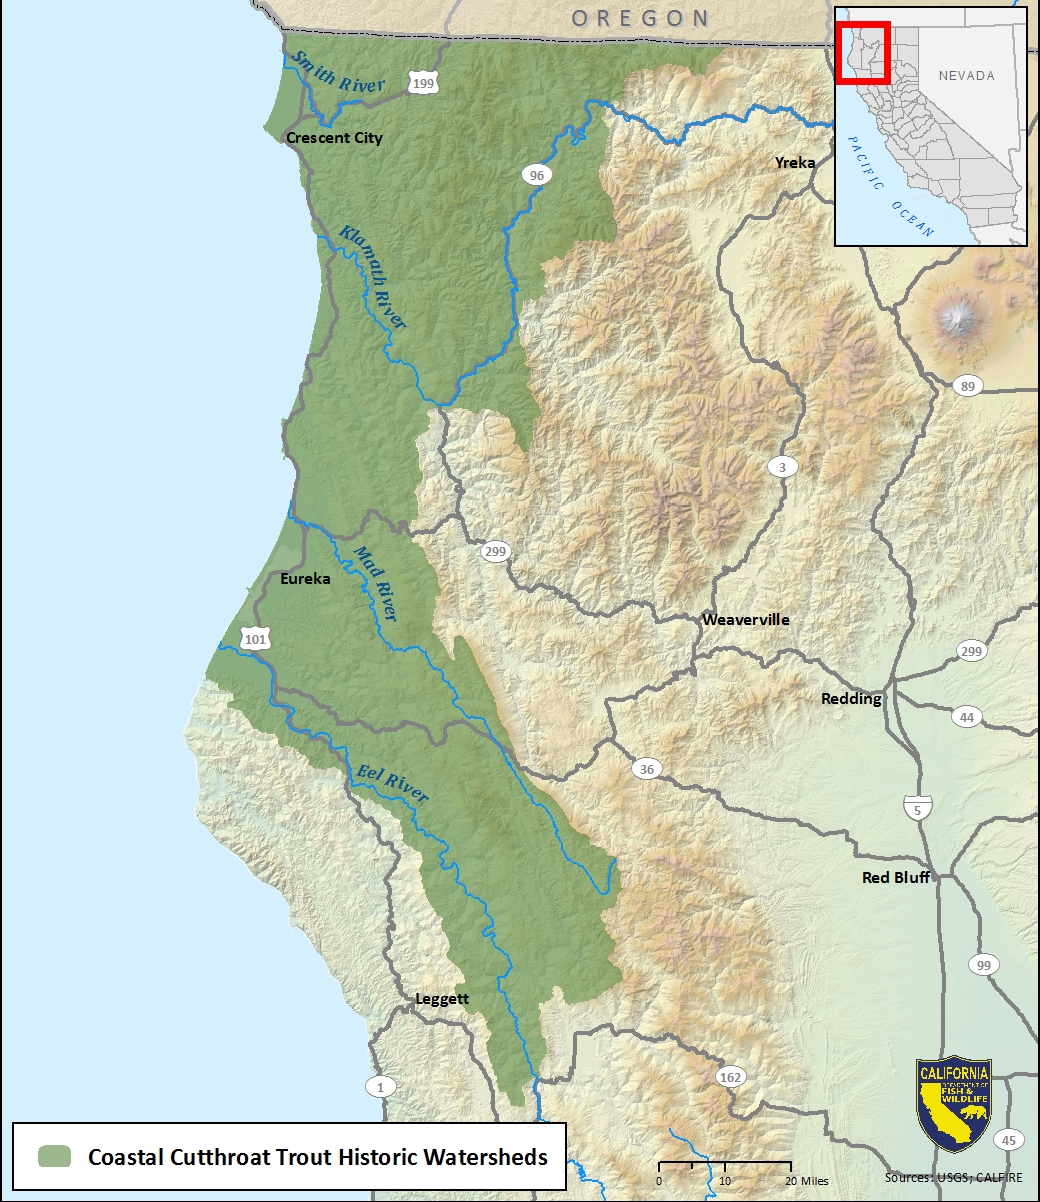 Map of coastal cutthroat trout historic watersheds - click to enlarge in new window